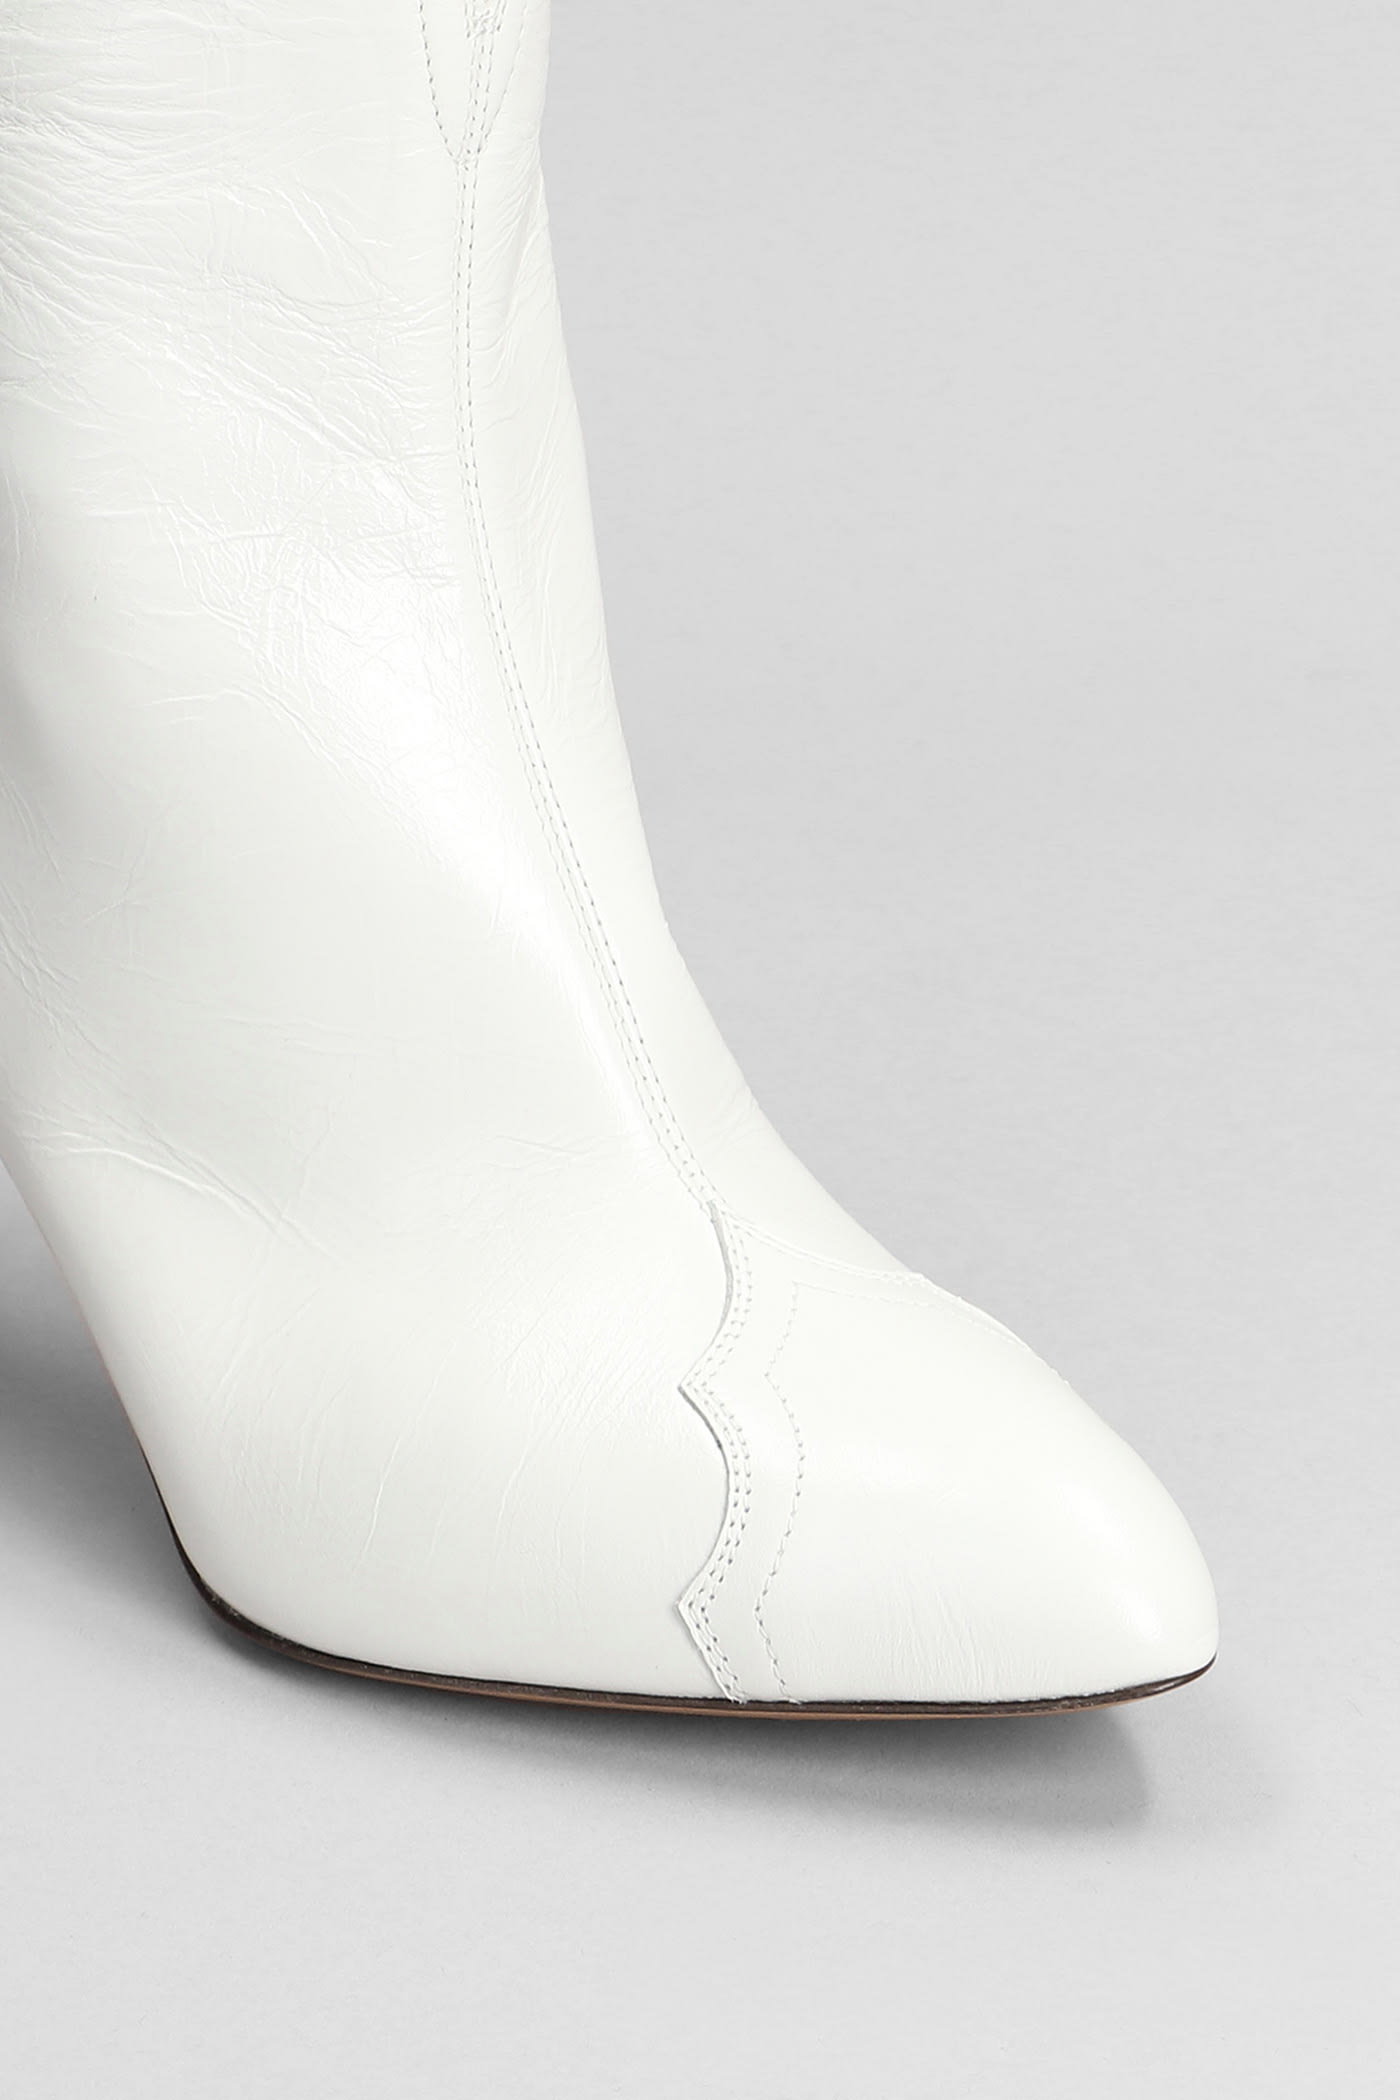 Shop Isabel Marant Dytho High Heels Ankle Boots In White Leather